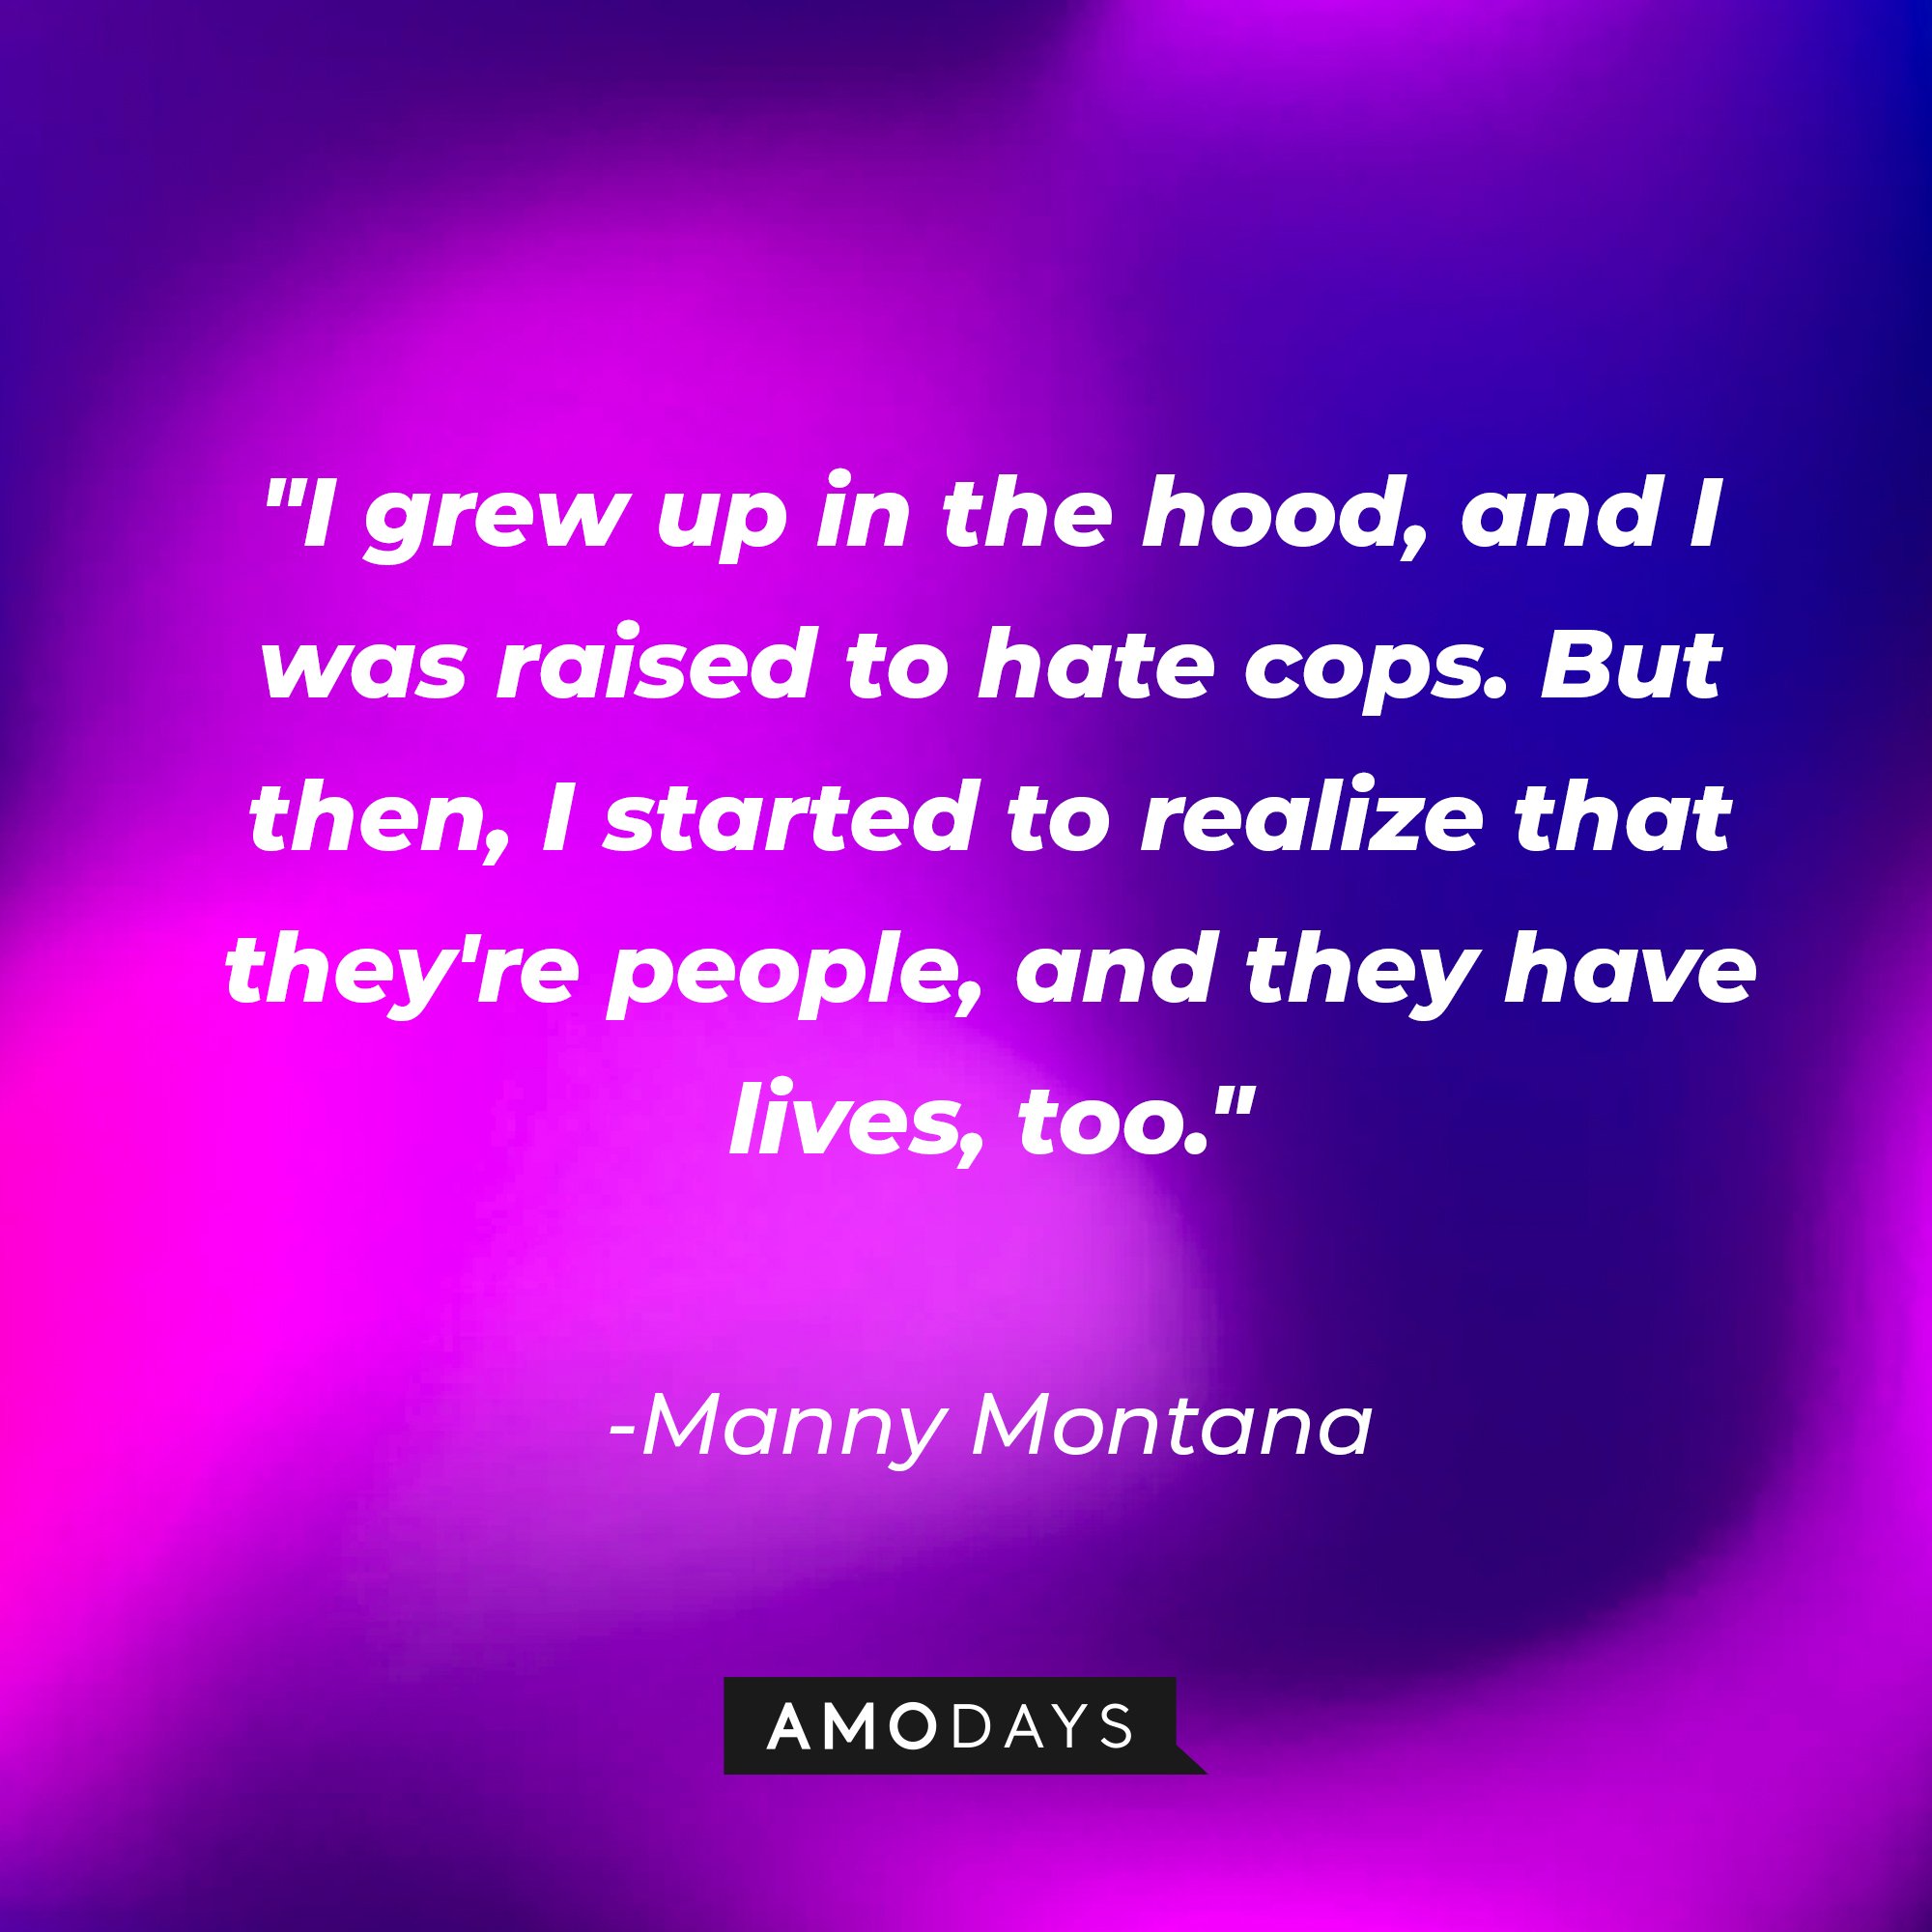 Manny Montana's quote: "I grew up in the hood, and I was raised to hate cops. But then, I started to realize that they're people, and they have lives, too." | Image: AmoDays